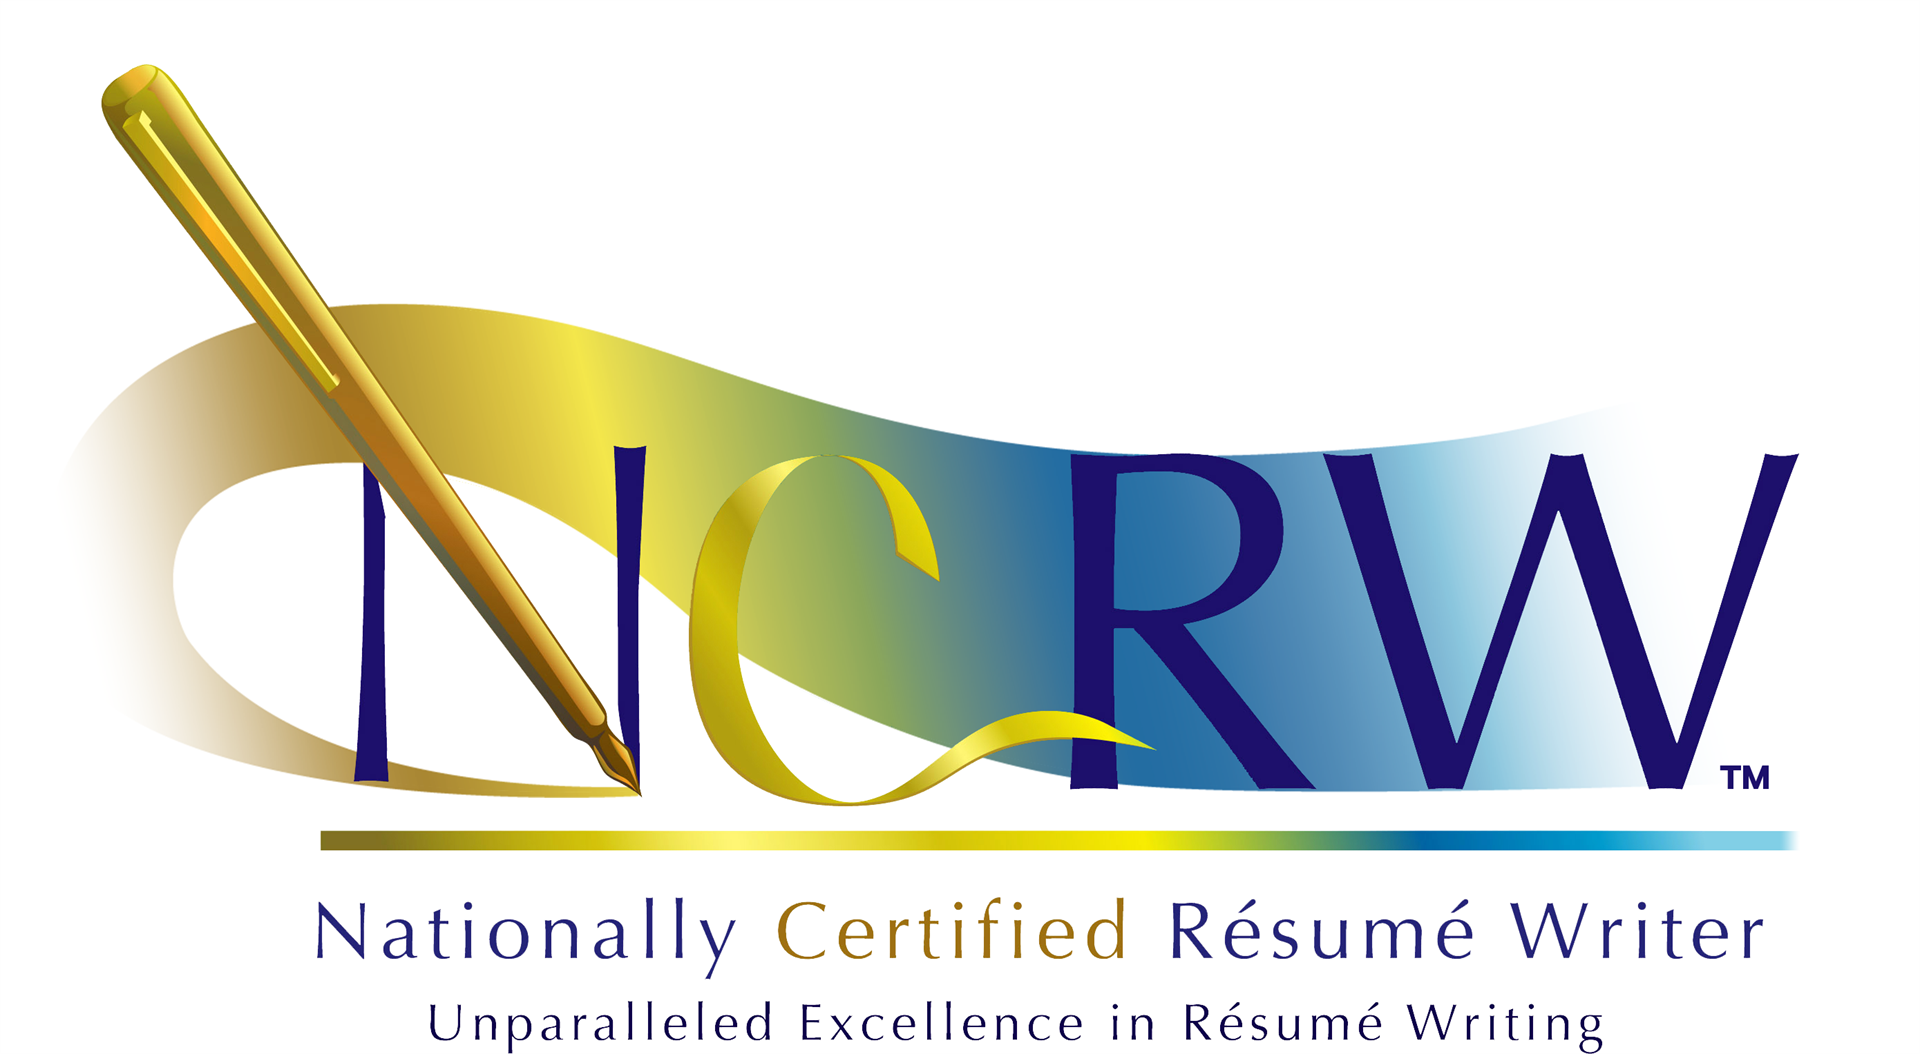 NCRW - Nationally Certified Resume Writer - Unparalleled Excellence in Resume Writing